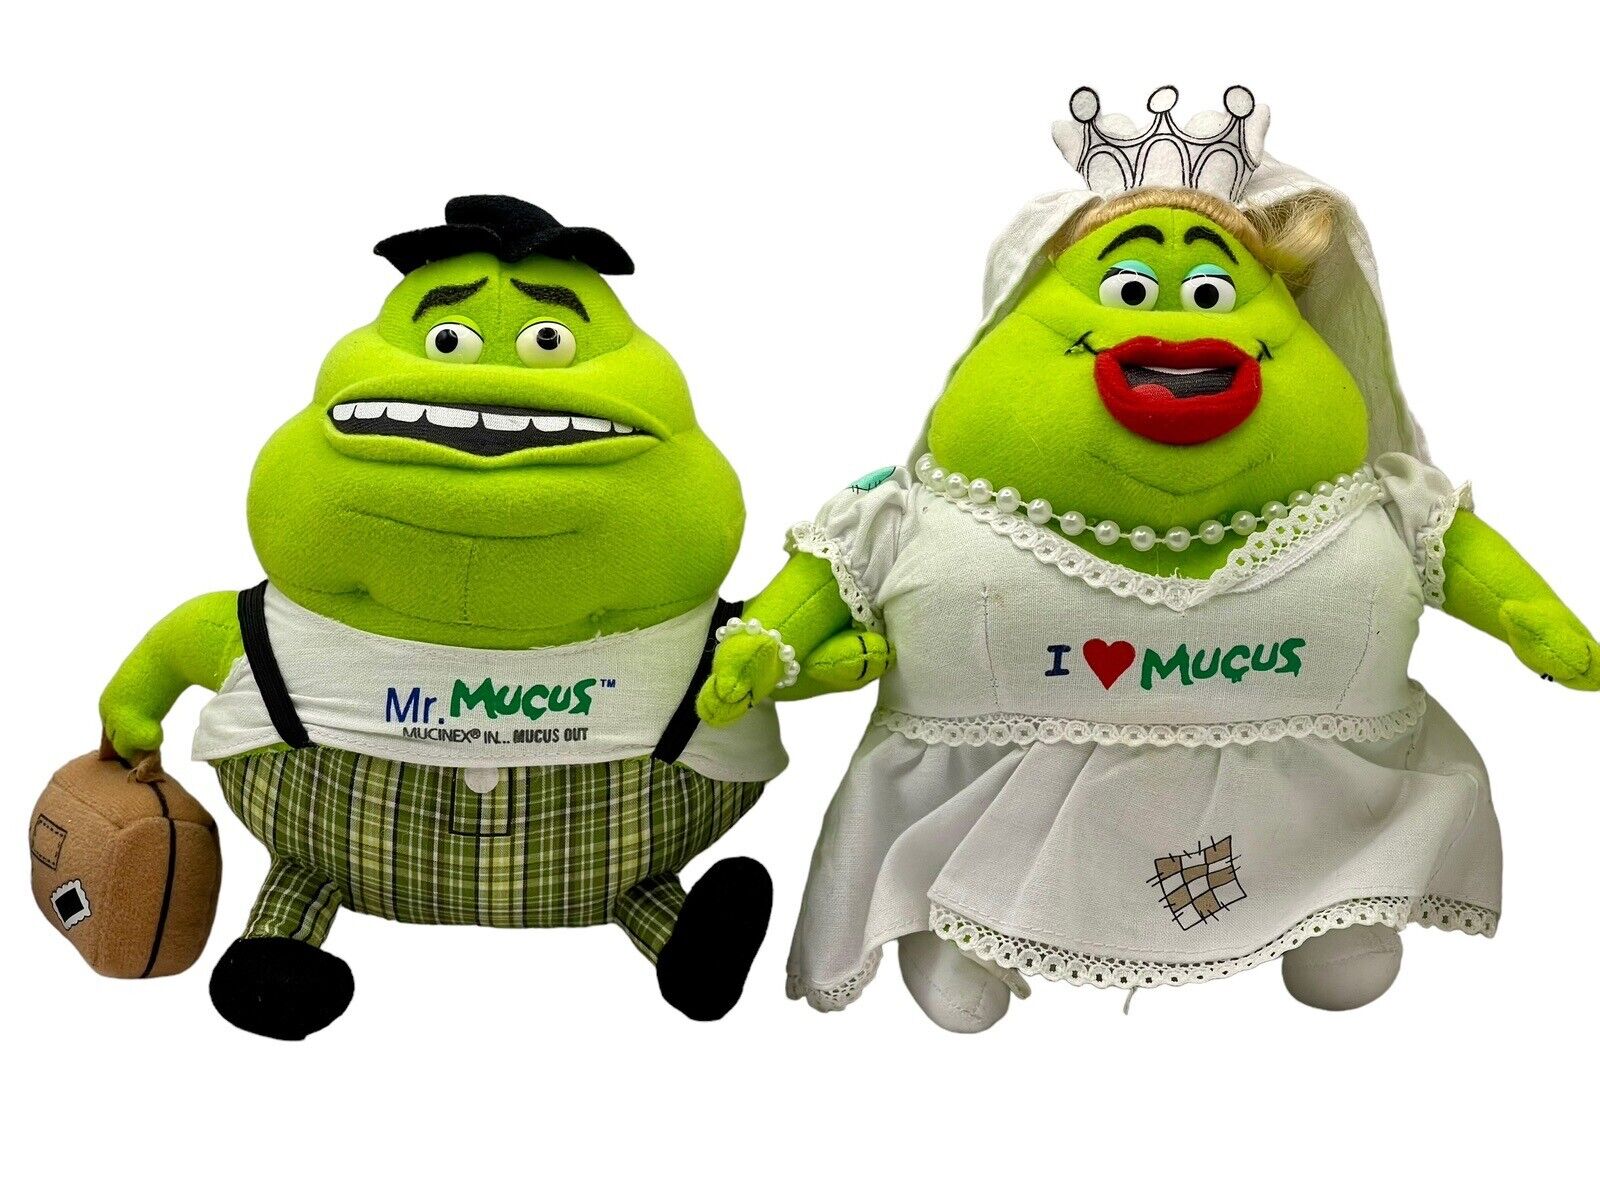 Mucinex Mr and Mrs Mucus Bride and Groom Plush Promotional  Advertisement  Dolls